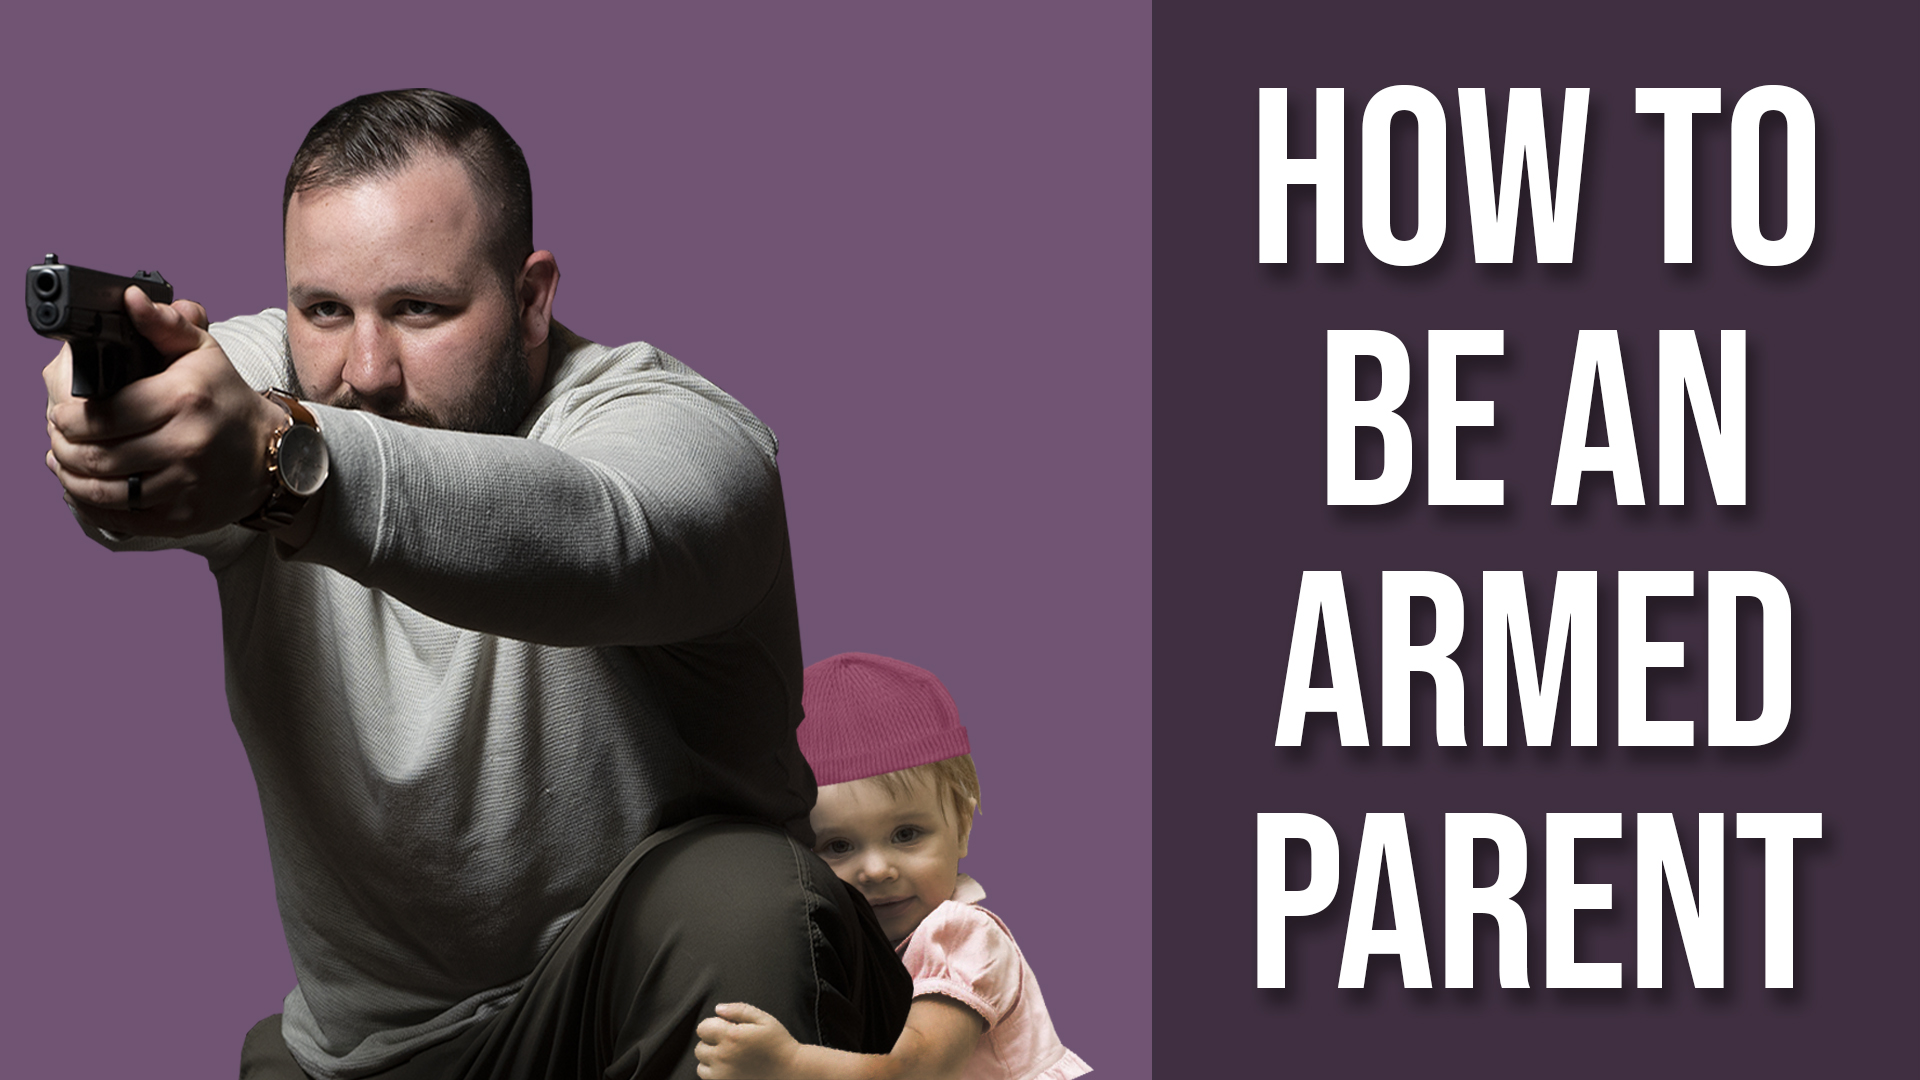 SOTG 841 - How to be an Armed Parent